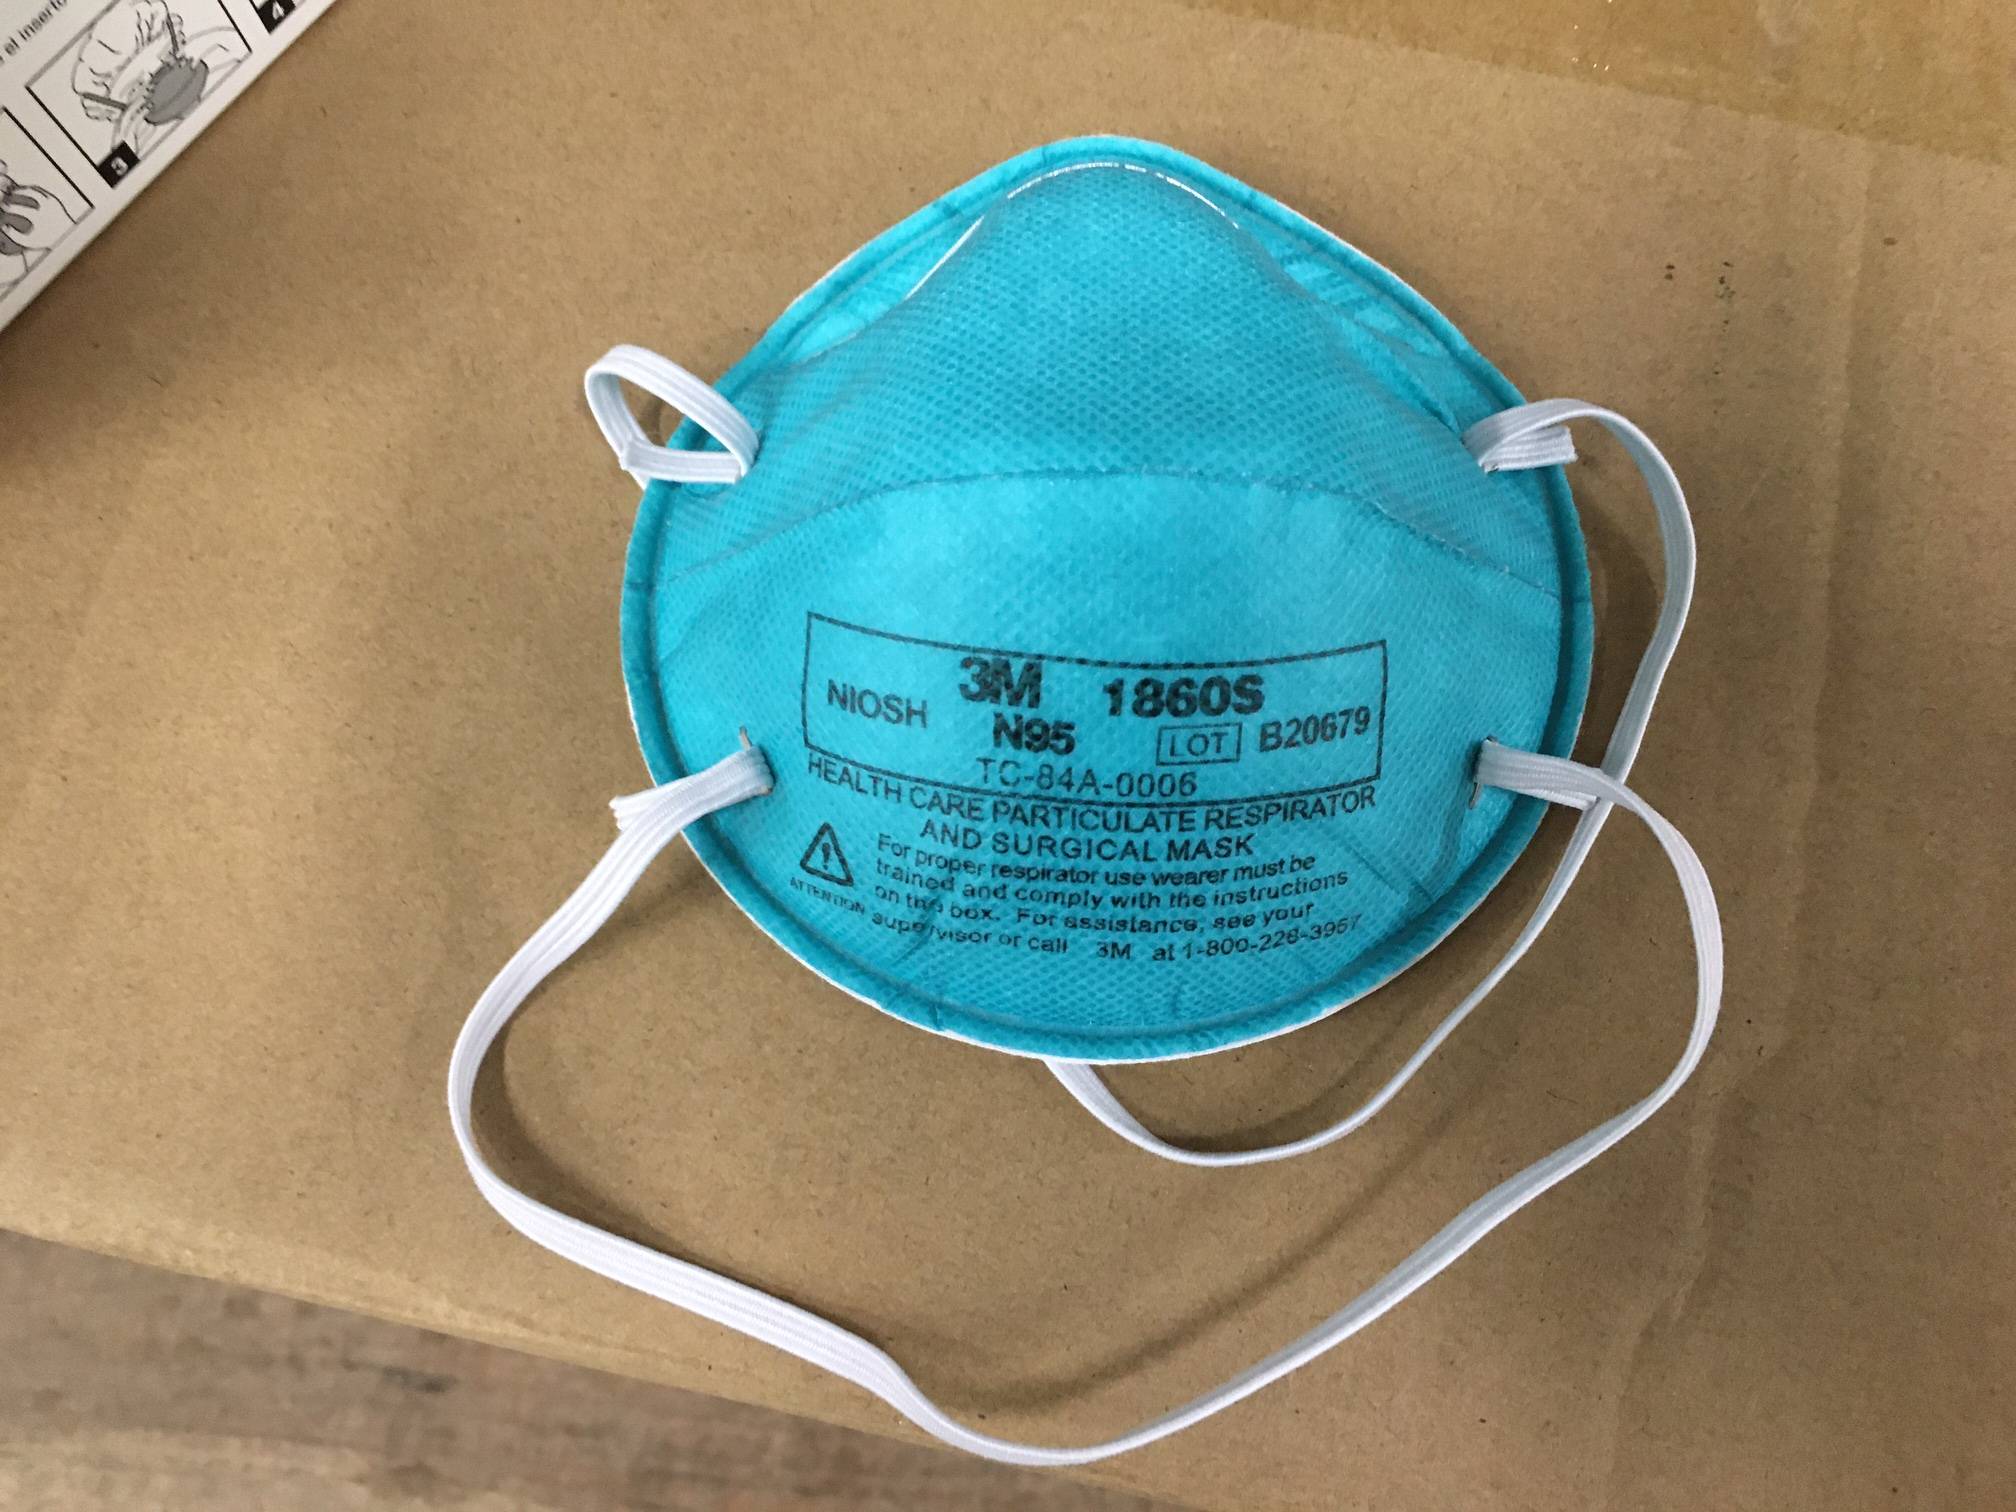 An example of a fake N95 mask, which according to experts looks, feels, and breathes like a real mask would. Courtesy photo